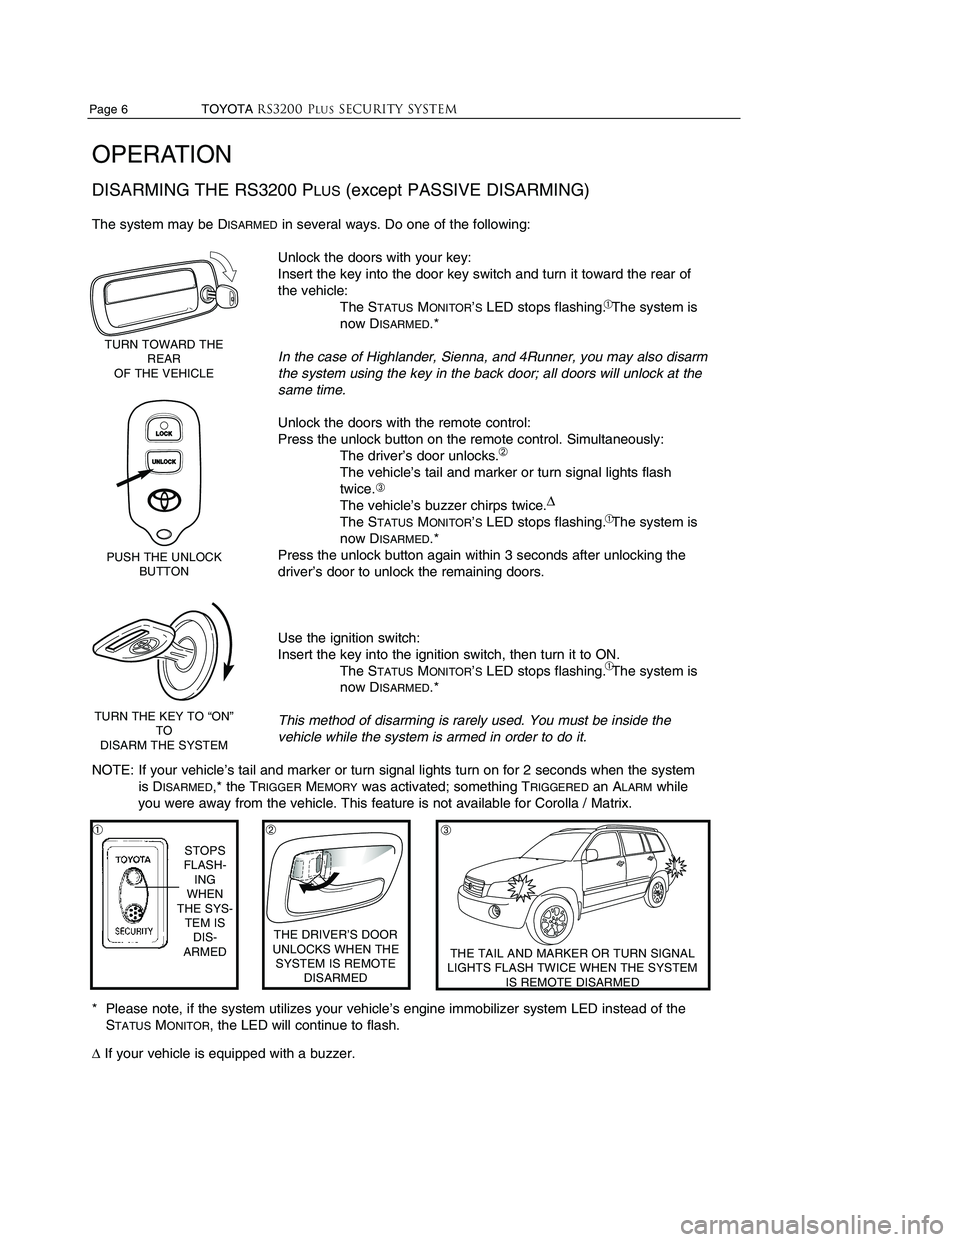 TOYOTA SOLARA 2003  Accessories, Audio & Navigation (in English) Page 6                    TOYOTARS3200 PLUSSecurity system
OPERATION
DISARMING THE RS3200 PLUS(except PASSIVE DISARMING)
The system may be DISARMEDin several ways. Do one of the following: 
Unlock the